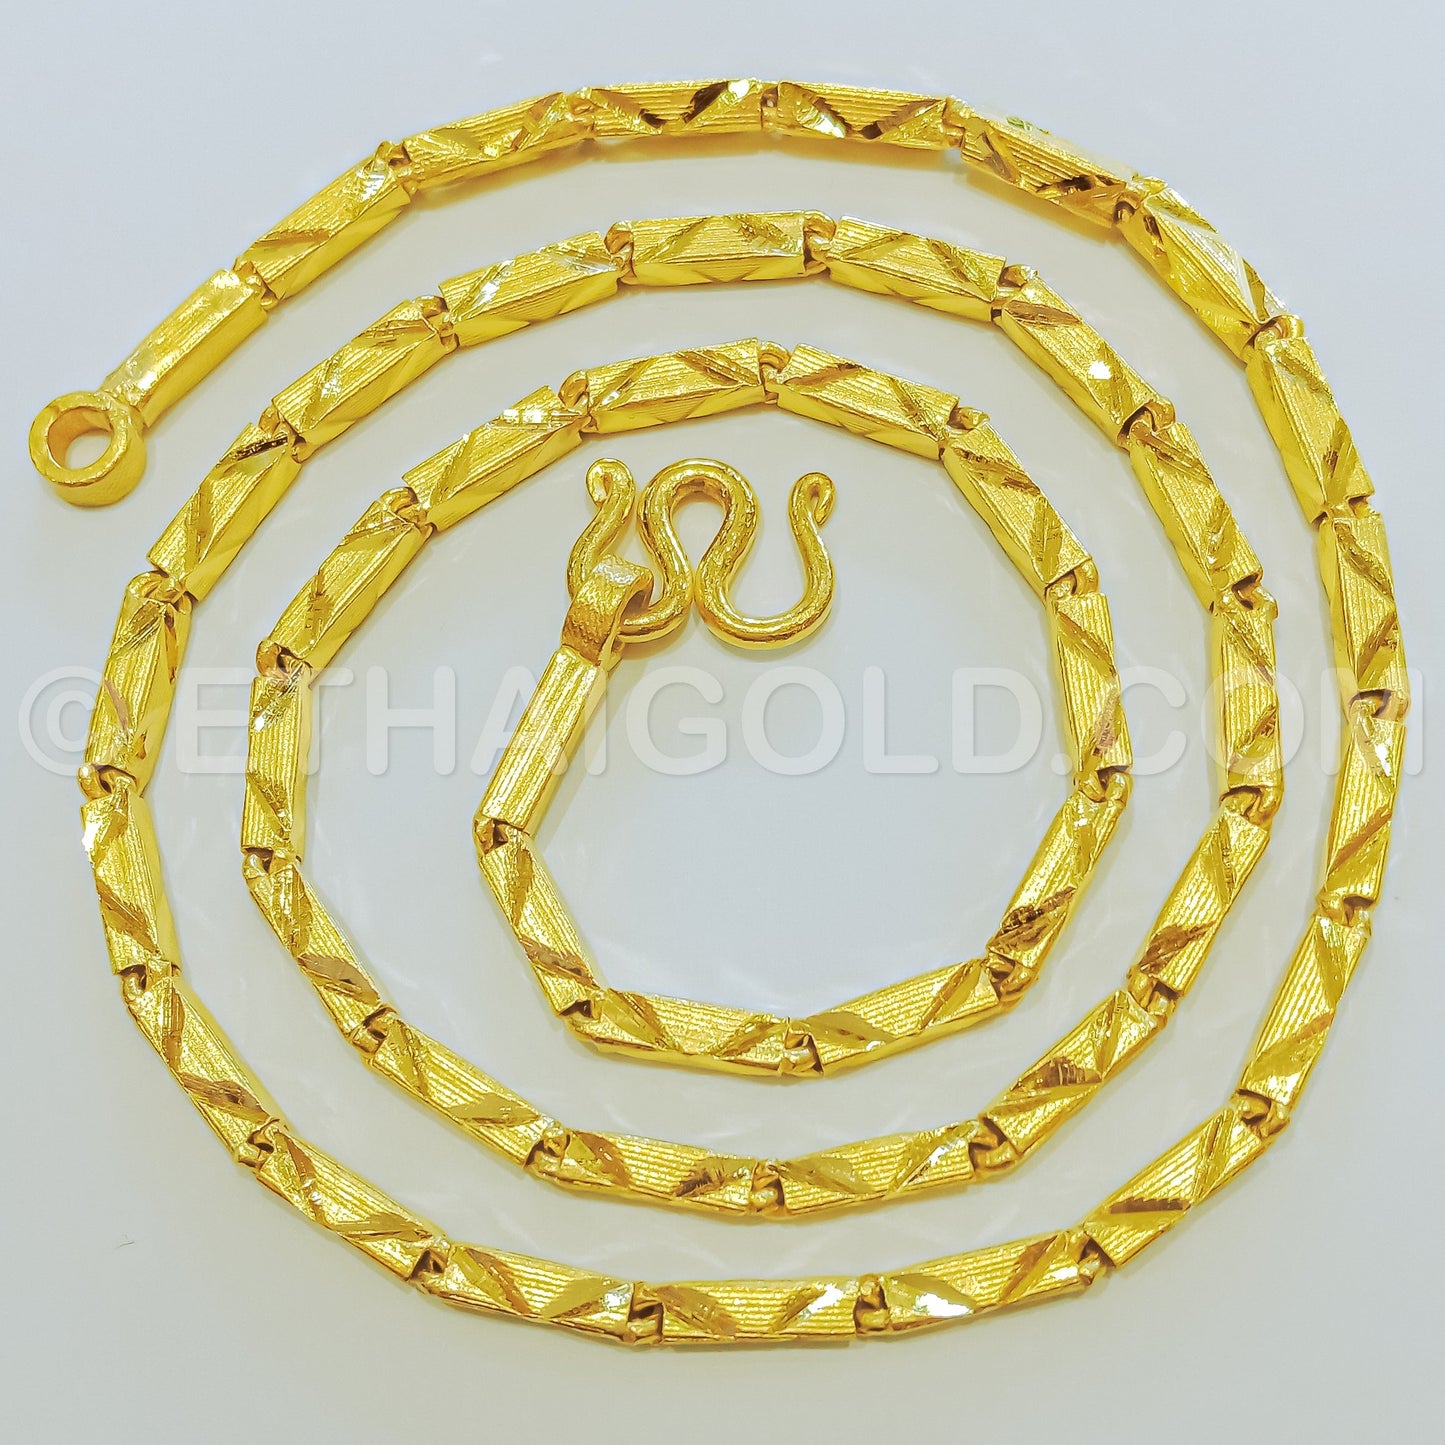 2 BAHT MATTE DIAMOND-CUT SOLID SQUARE BARREL CHAIN NECKLACE IN 23K GOLD (ID: N2002B)